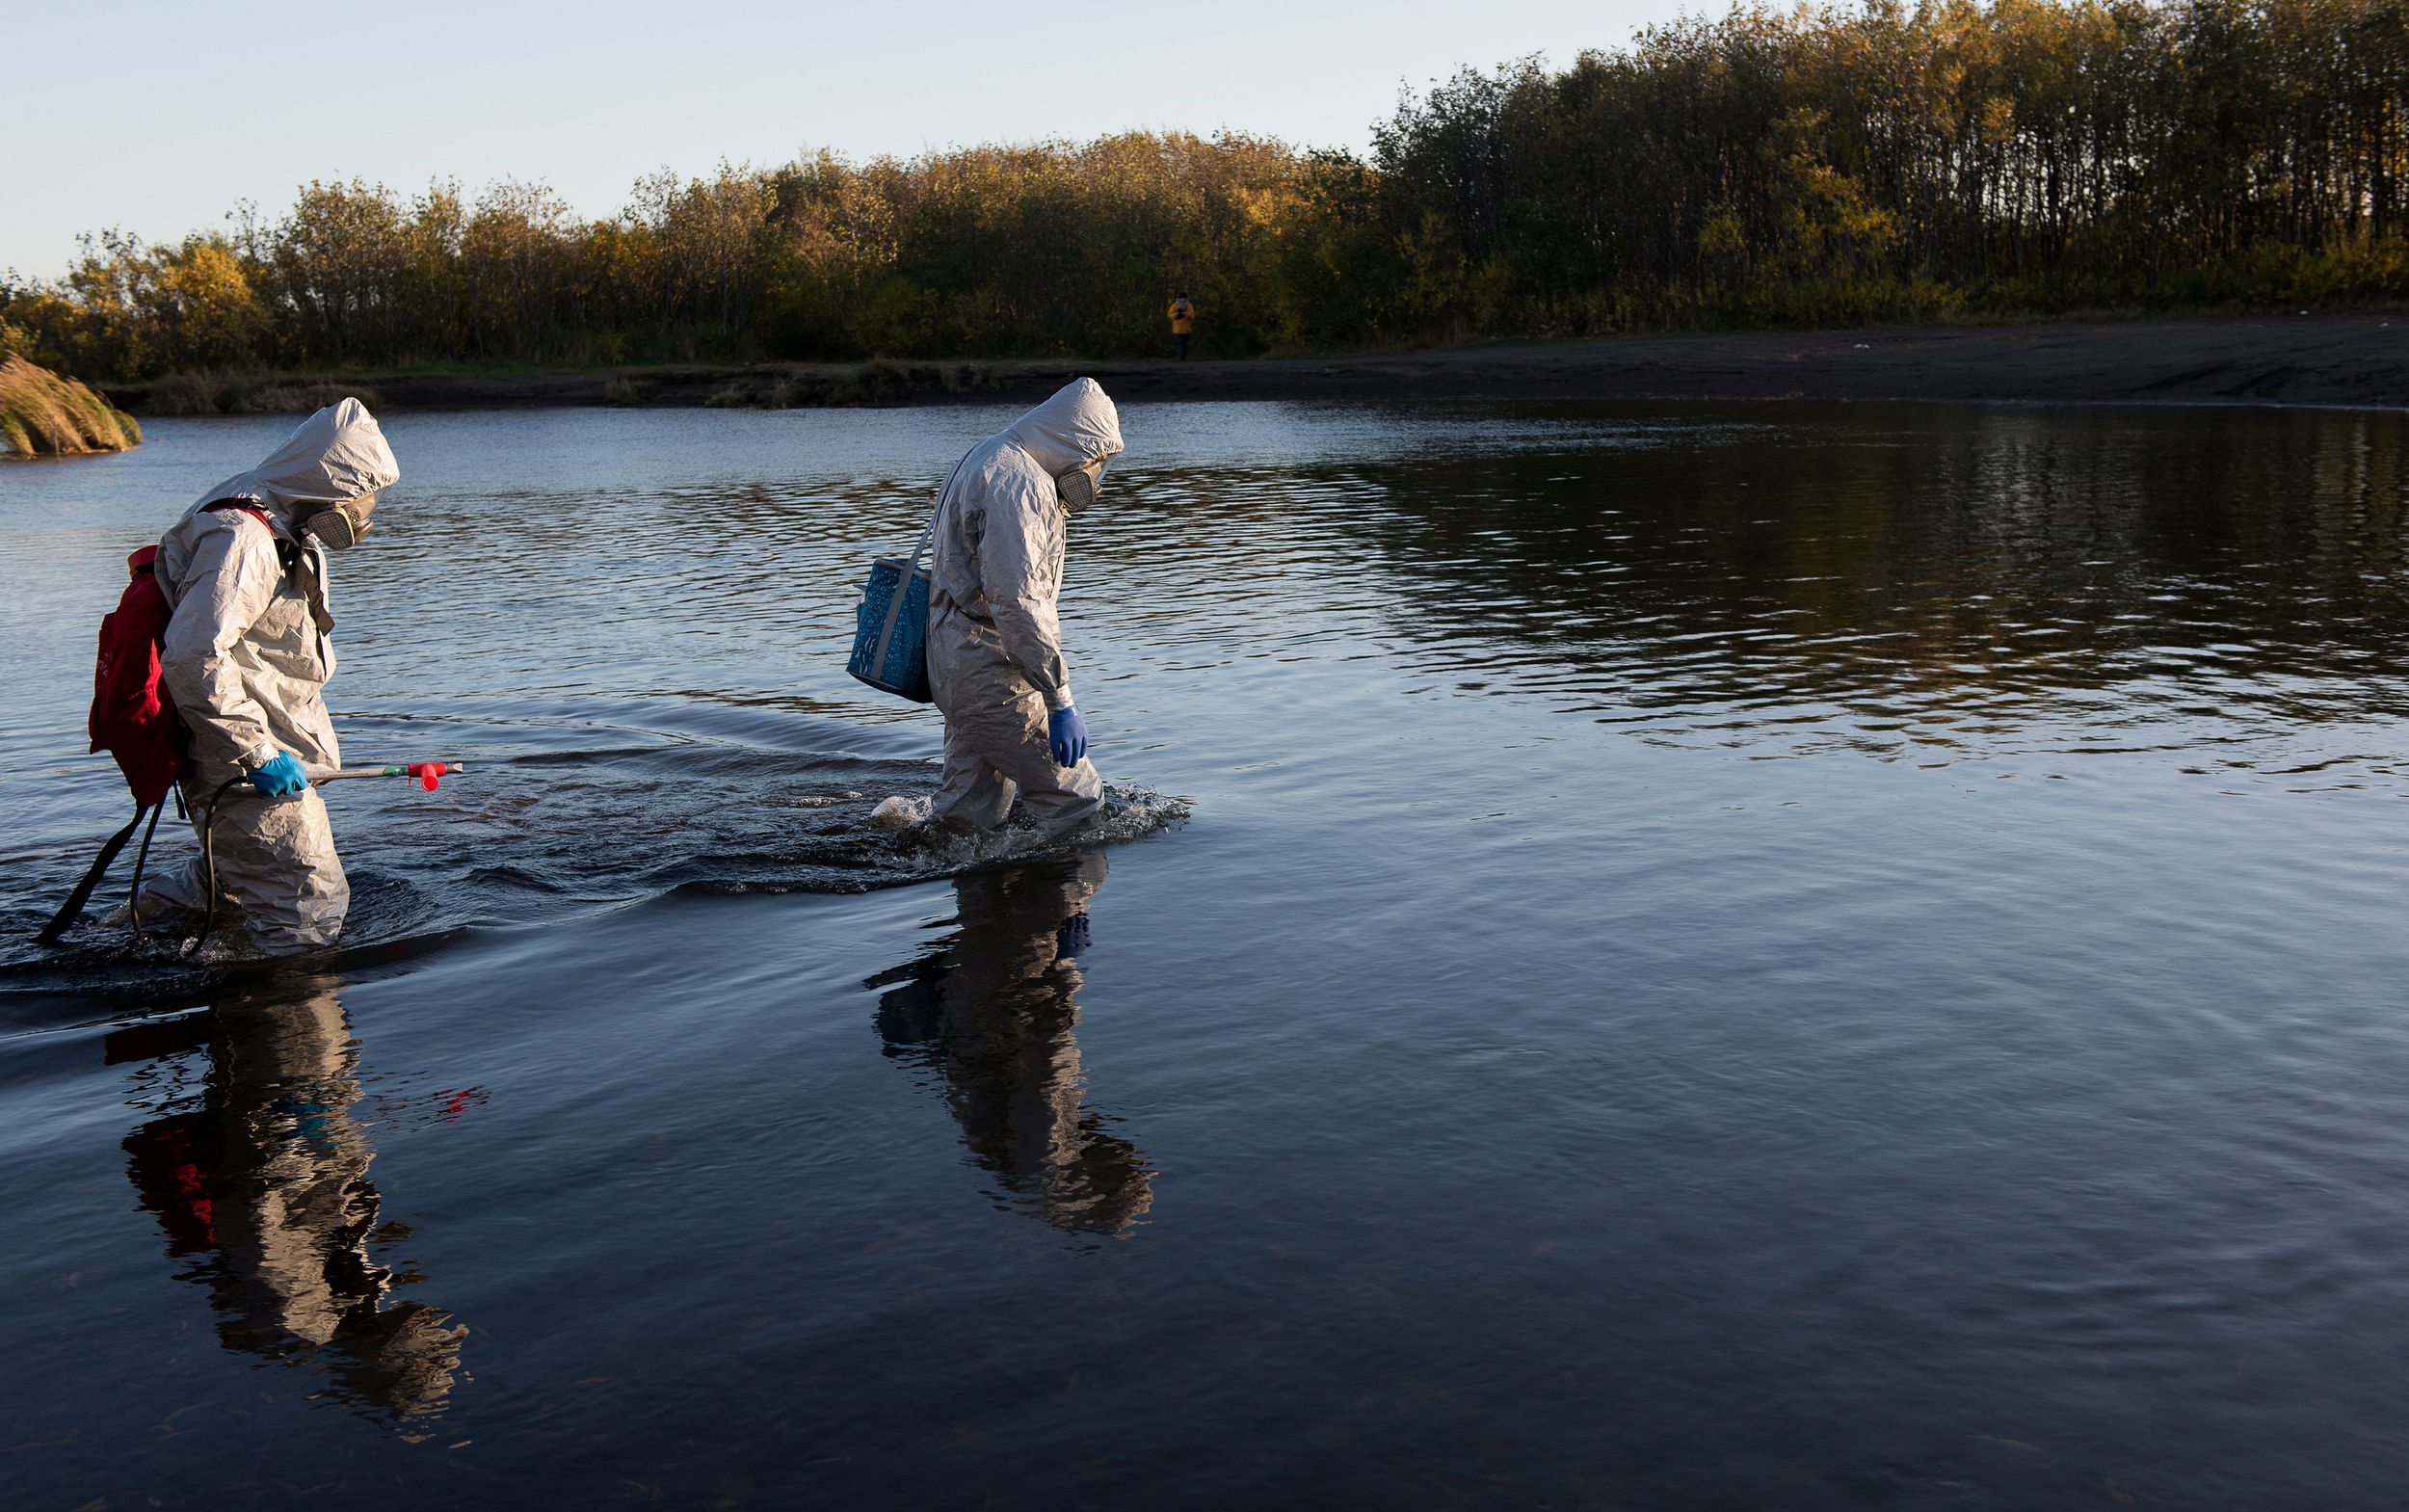 Experts collect water samples during the Greenpeace expedition to inspect territories of Kamchatka peninsula that could be affected by pollution, Russia October 8, 2020. Credit: Greenpeace Russia/Handout via REUTERS